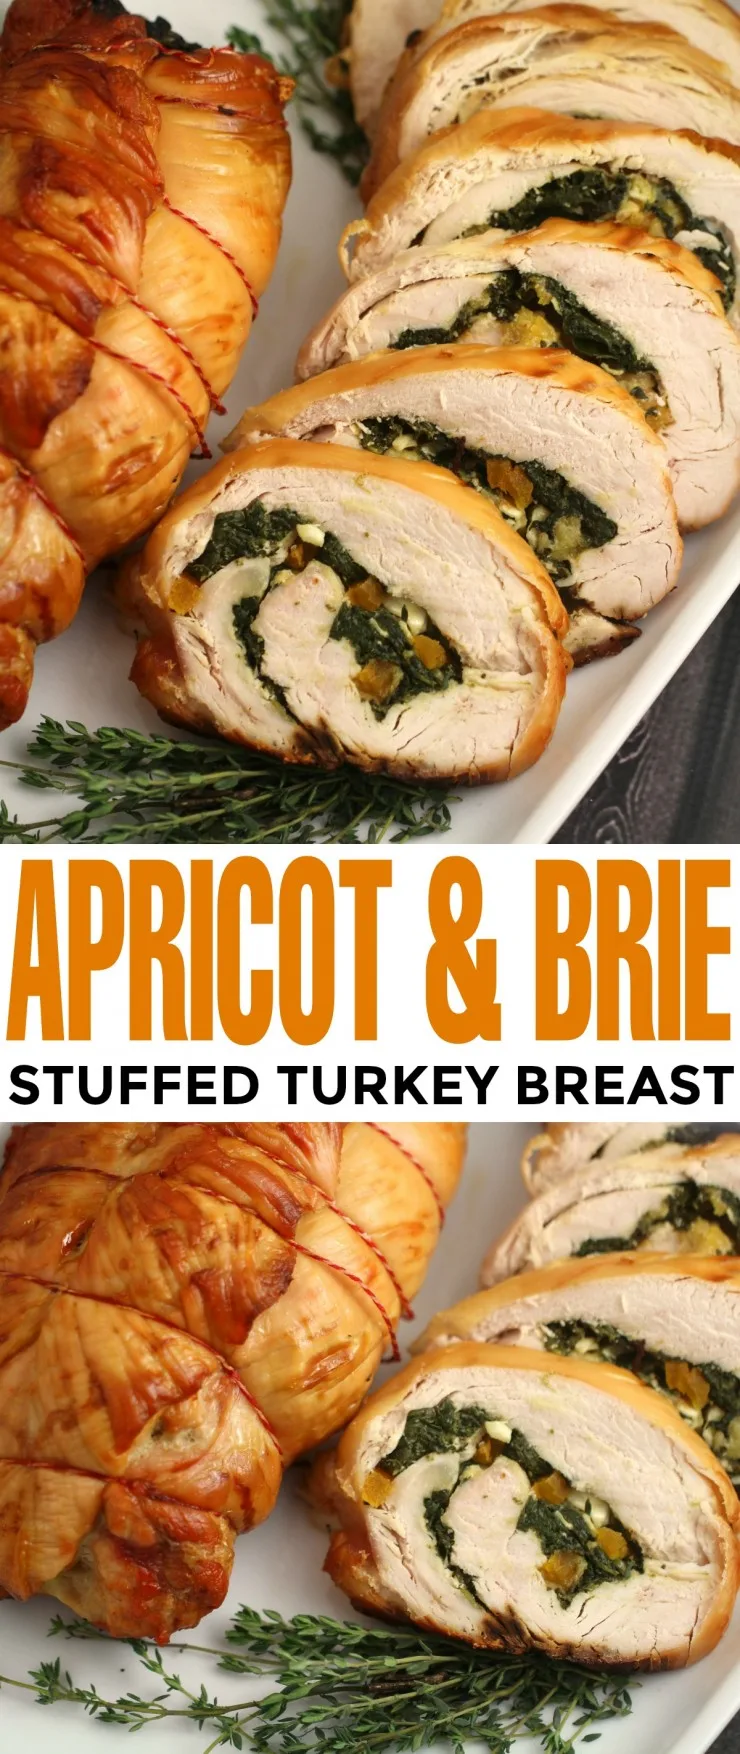 Today I am sharing with you my recipe for apricot and brie stuffed turkey breast. This turkey recipe is easy to prepare but has such a stunning presentation that it can easily go from weekday meal to a dinner party show stopper.